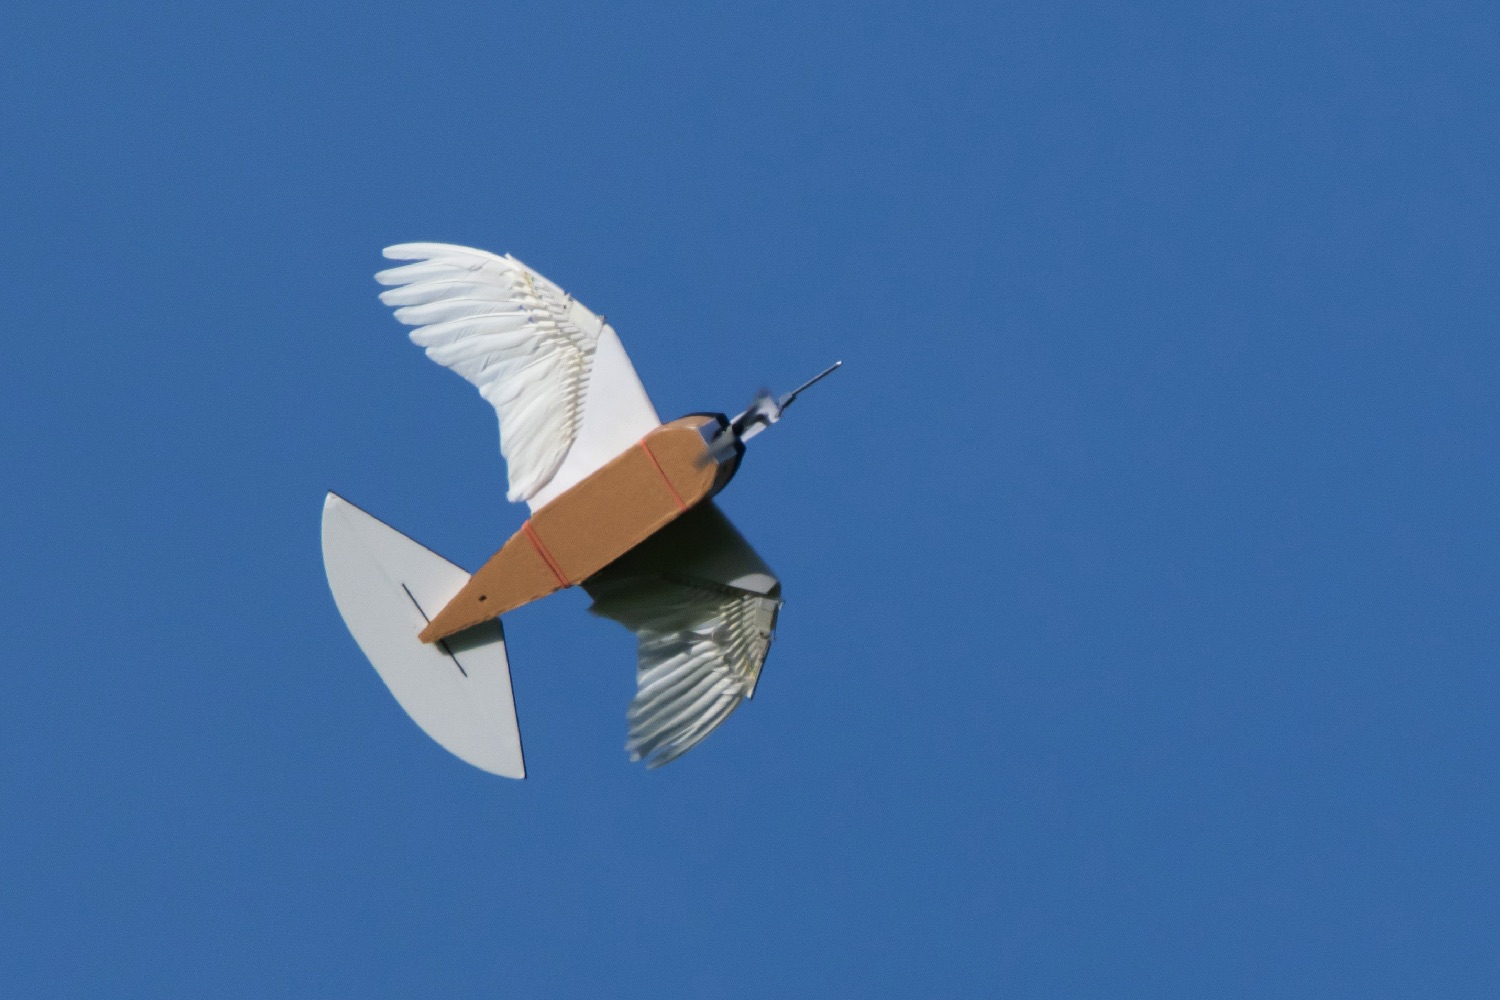 pigeon bot feather drone takes flight dl0 0218 2